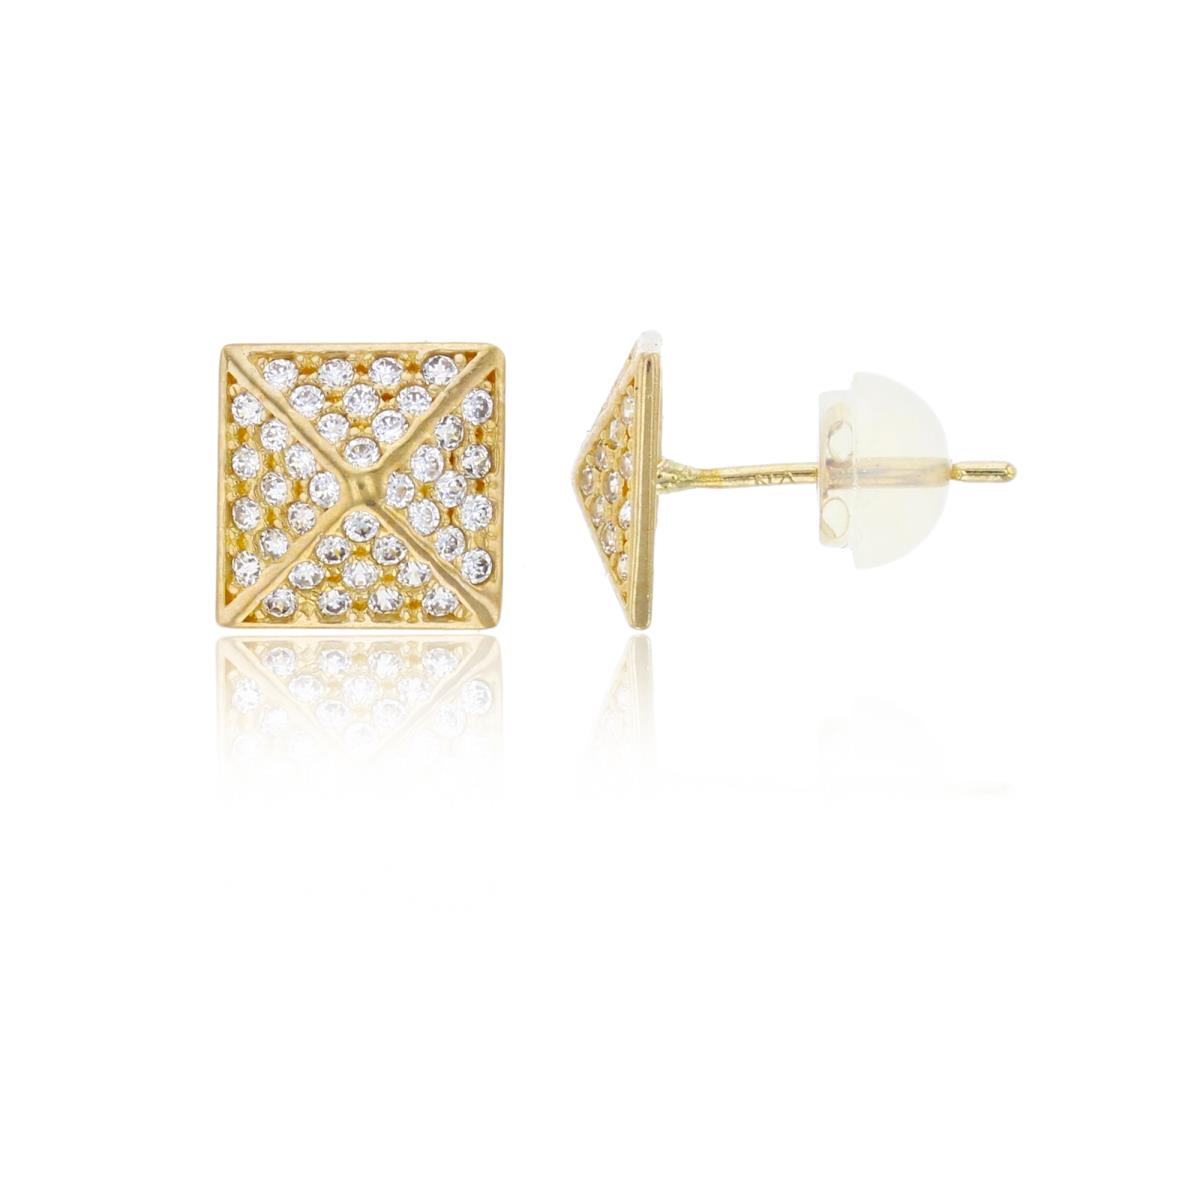 10K Yellow Gold 8x8mm Micropave Square Stud Earring